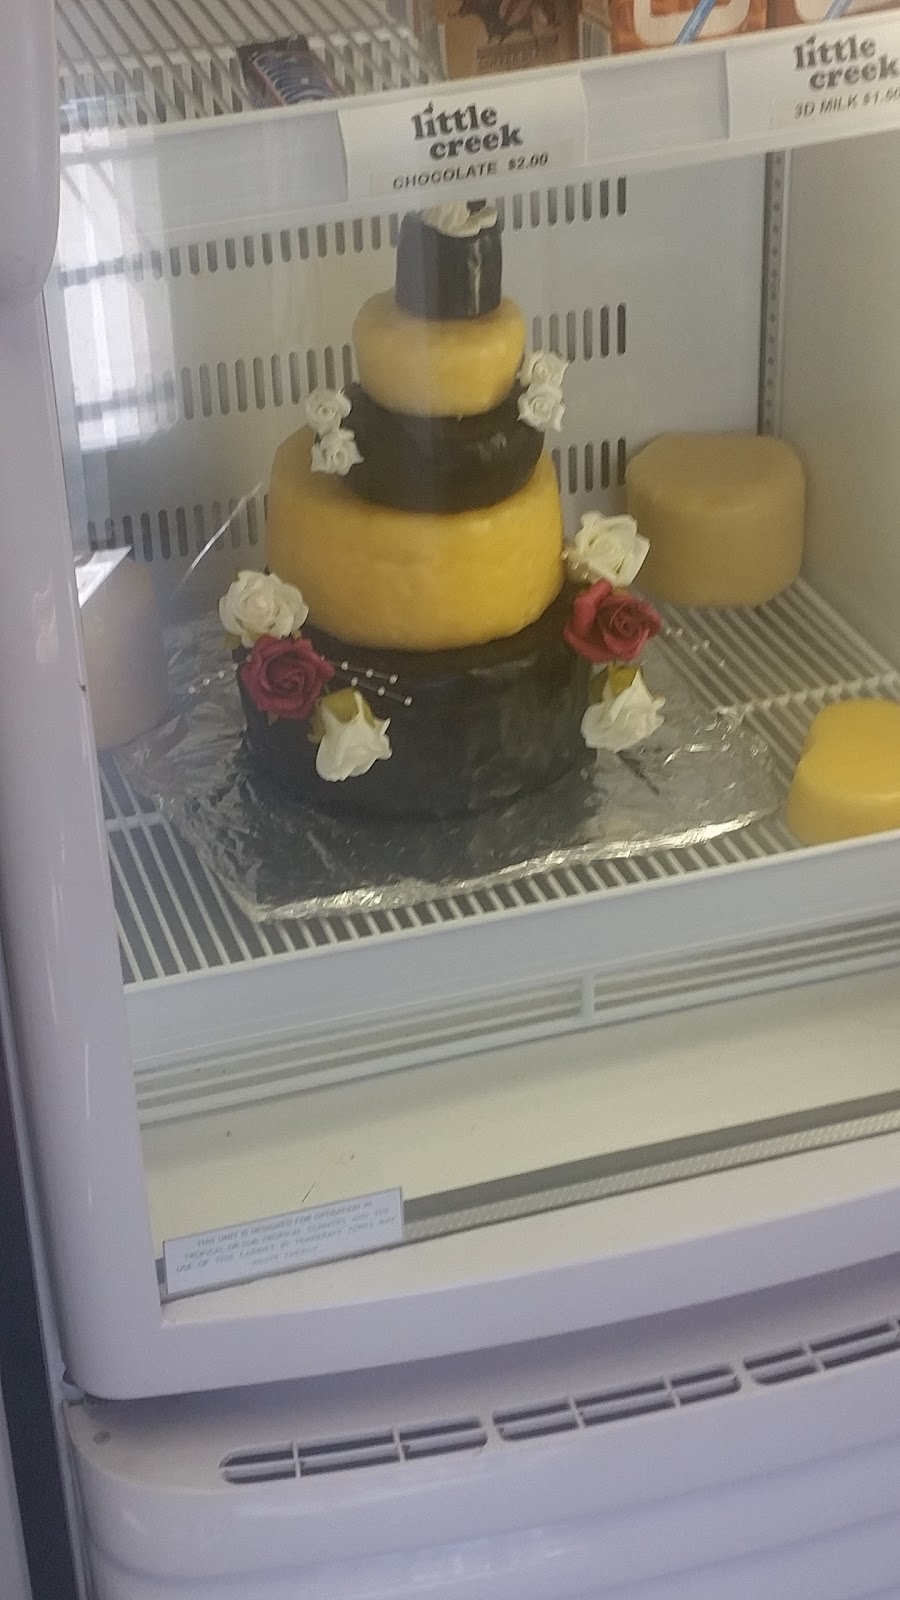 Little Creek Cheese | store | 141-155 Alison Rd, Wyong NSW 2259, Australia | 0243532433 OR +61 2 4353 2433